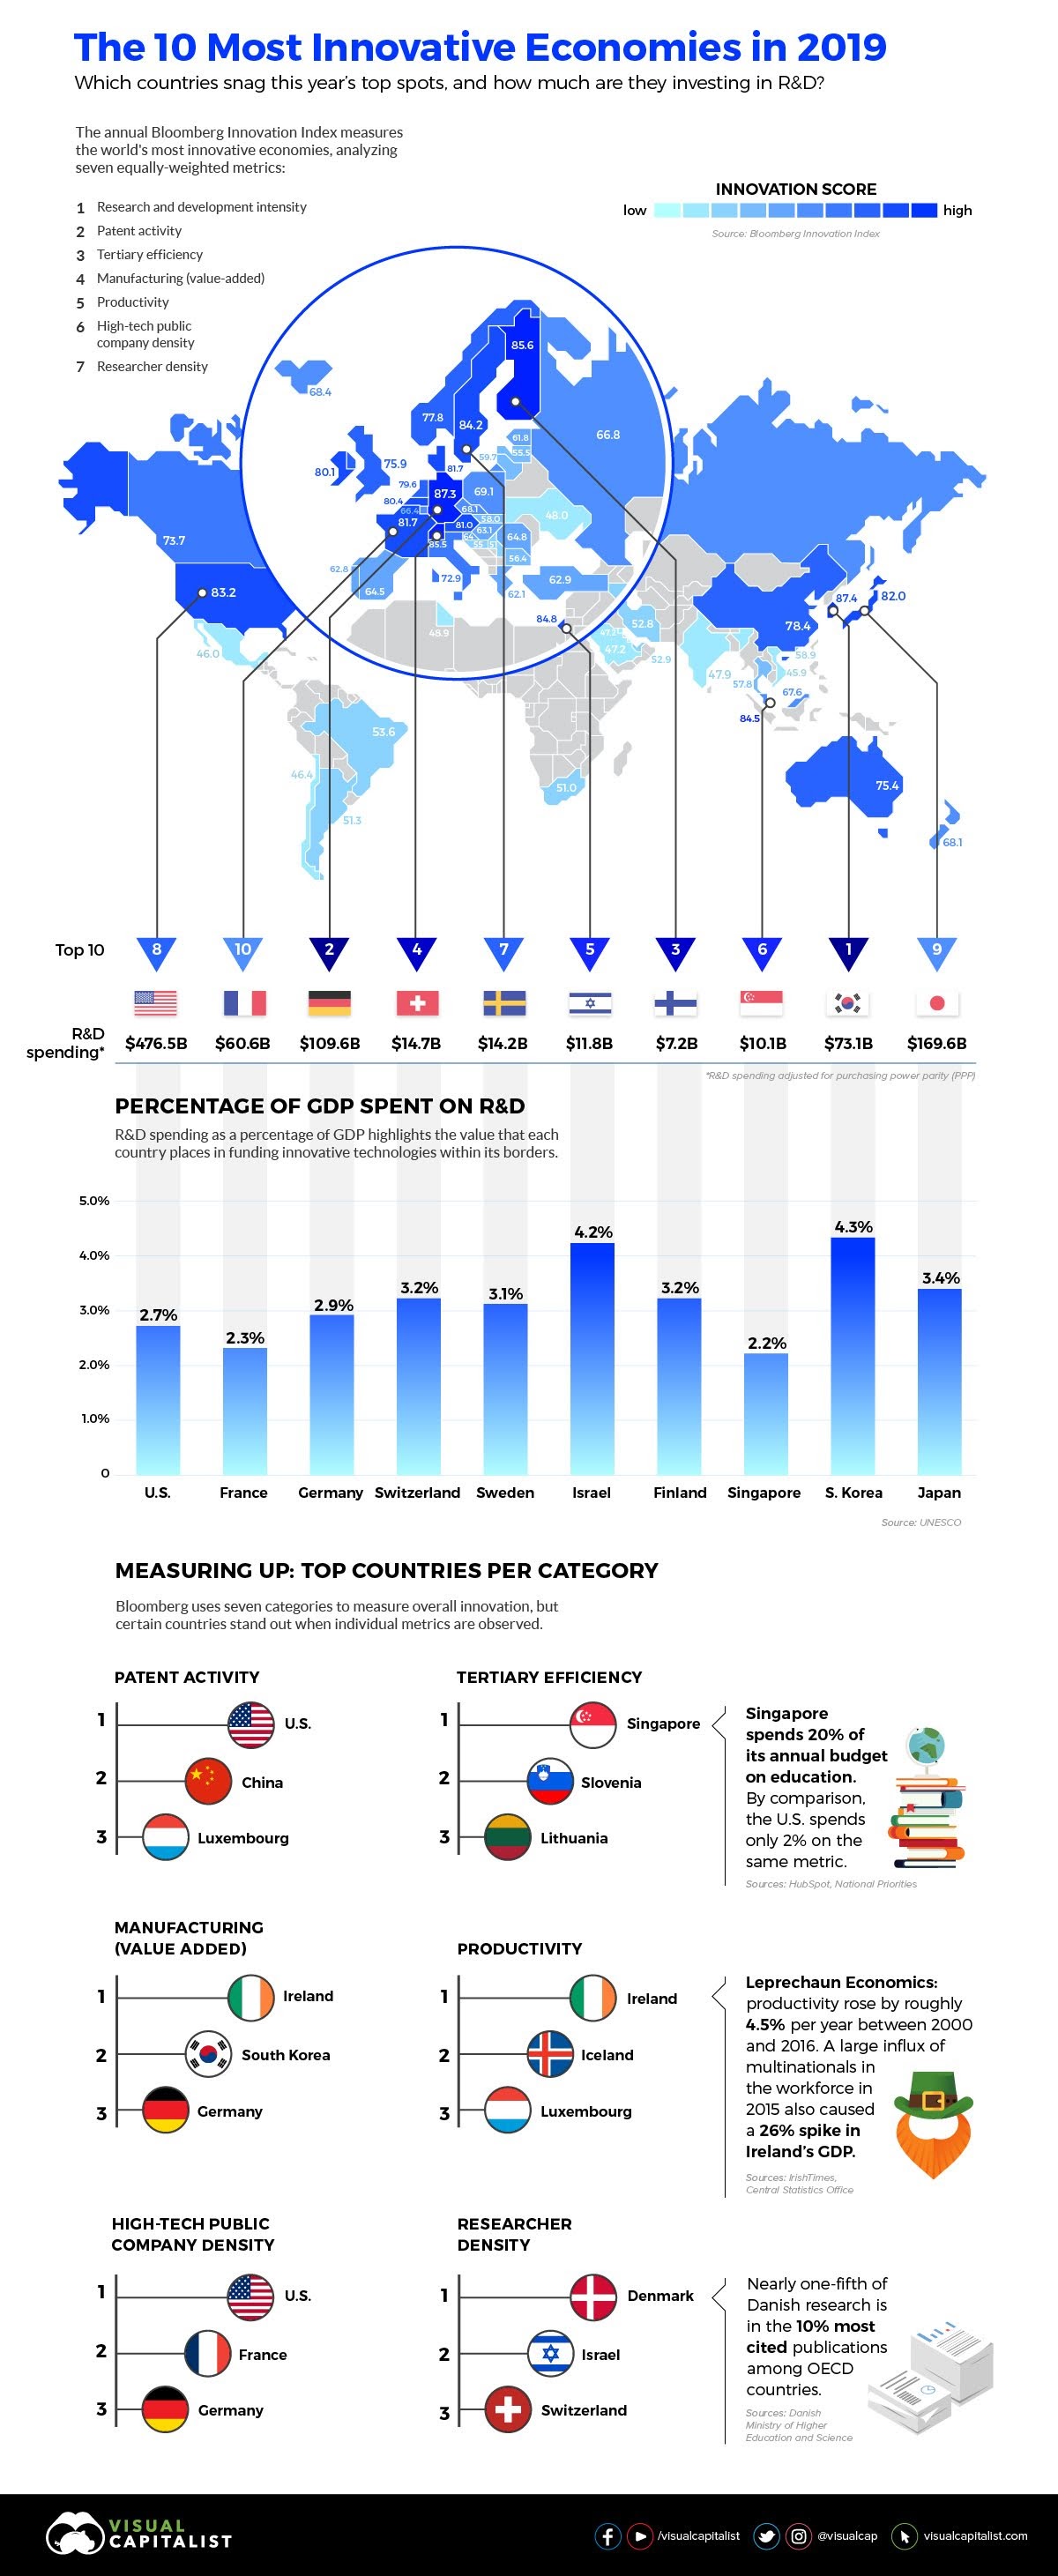 The World’s Most Innovative Economies #infographic